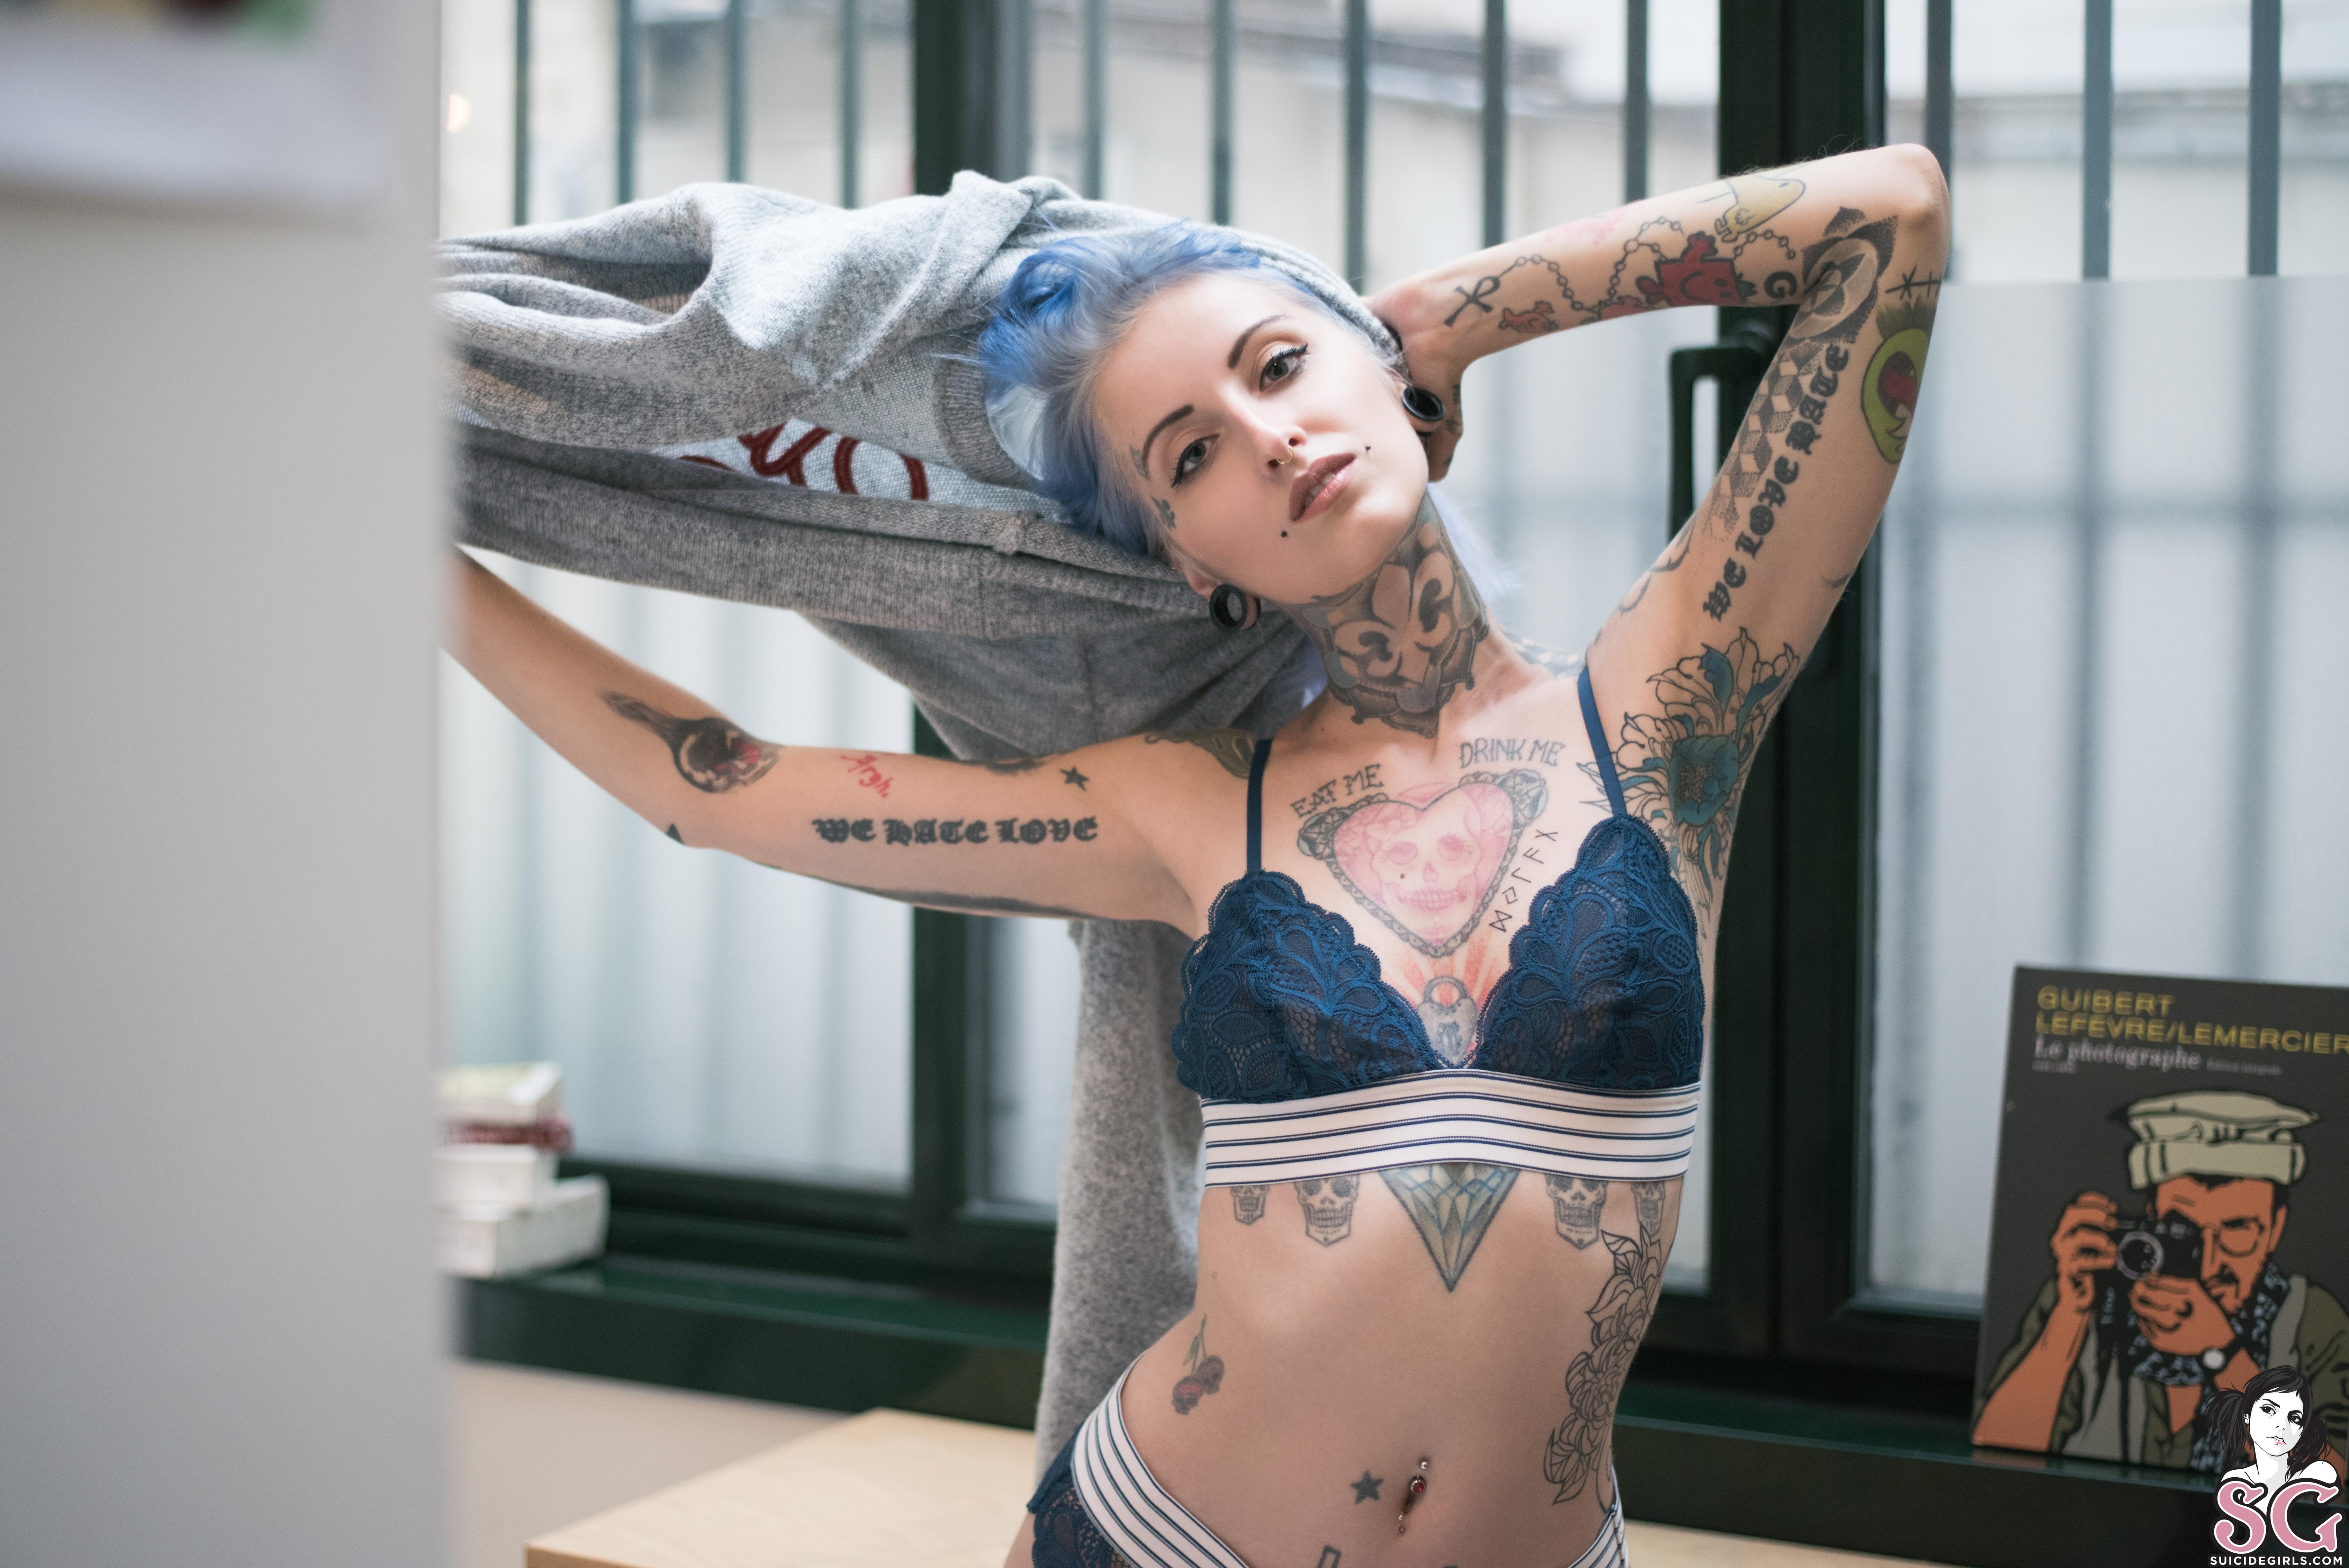 Blue Hair Lingerie - Download 6787x4530 gladyce suicide, suicide girls, model, dyed hair,  tattoo, lingerie, blue hair, piercing, bra, sexy Porno Photos, Erotic  Wallpapers